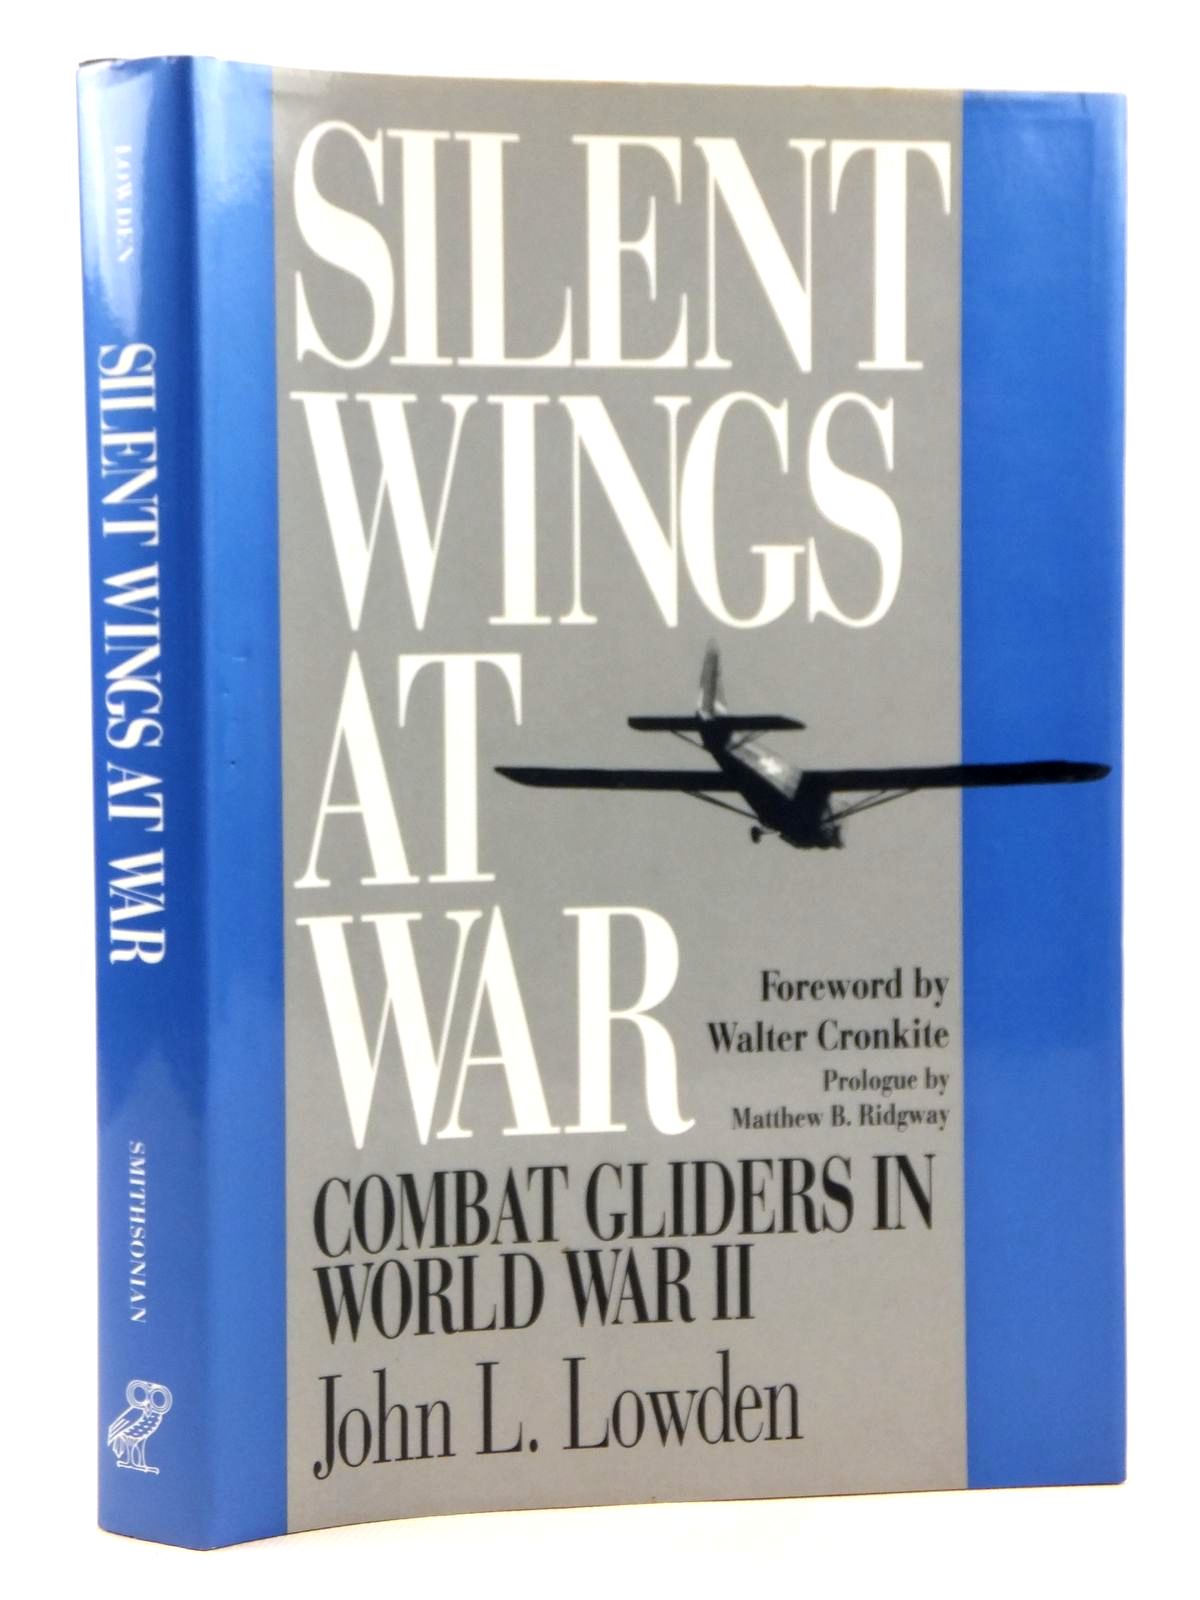 Photo of SILENT WINGS AT WAR written by Lowden, John L. published by Smithsonian Institution Press (STOCK CODE: 1608889)  for sale by Stella & Rose's Books